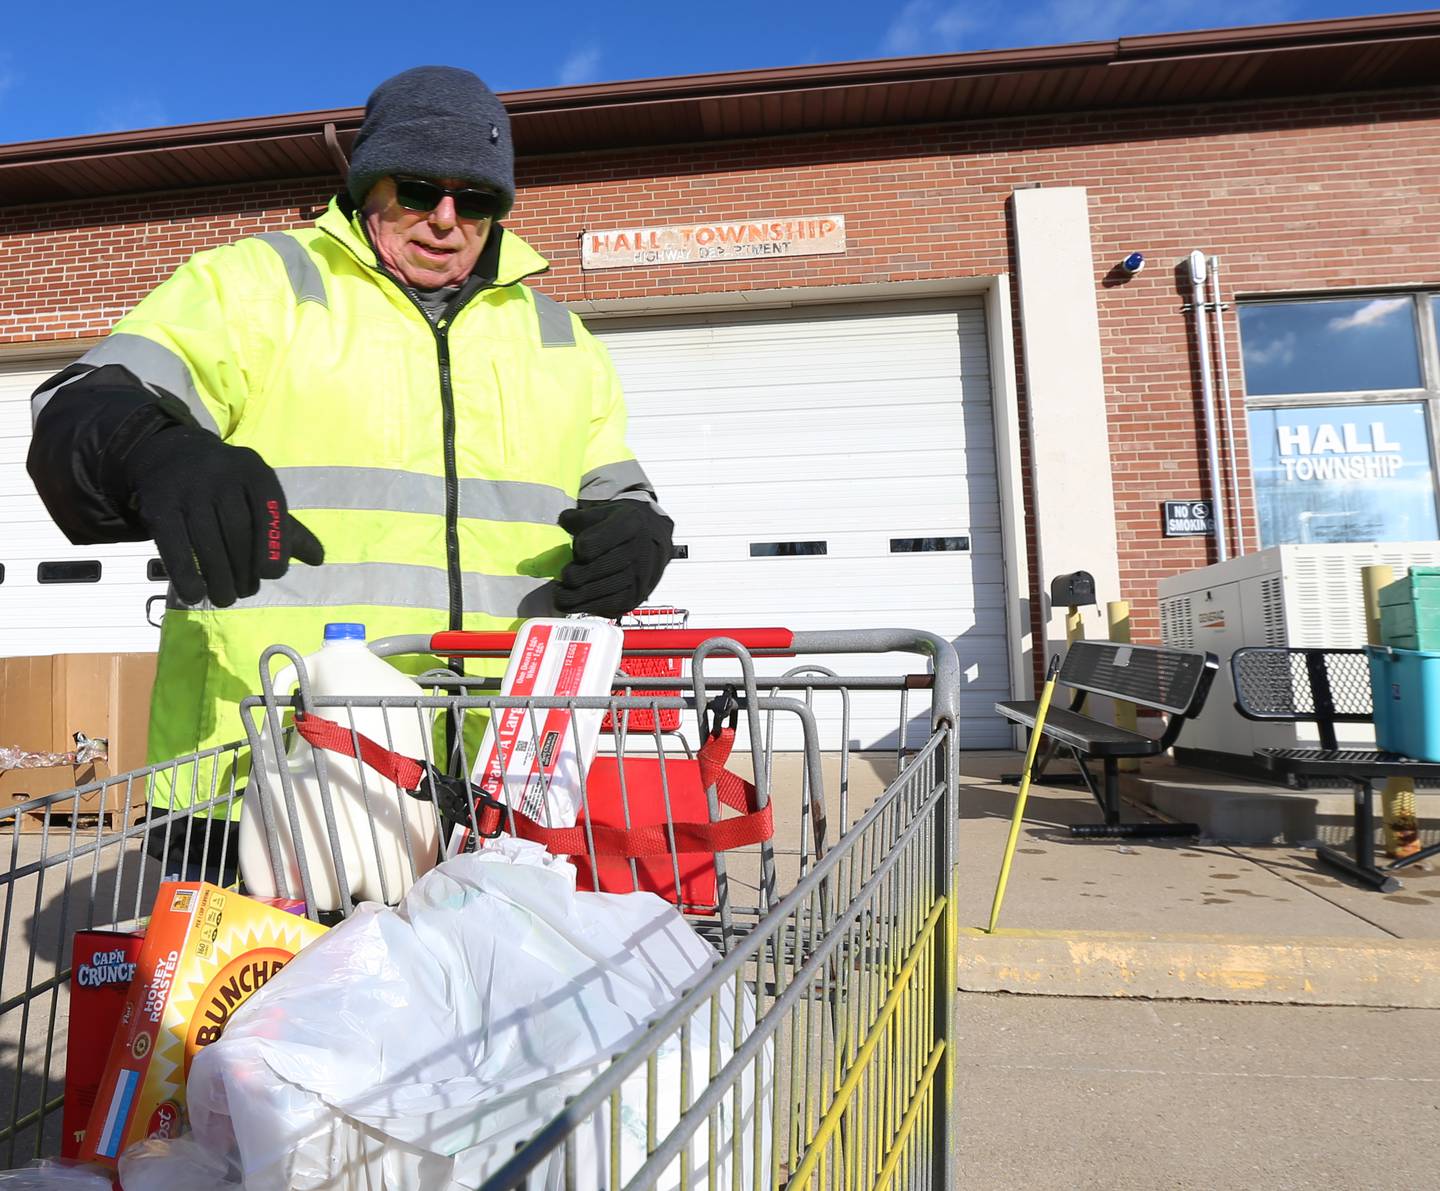 Volunteer Joe Nagle unloads a cart of food for a client on at the Hall Township Food Pantry on Wednesday, Nov. 30, 2022 in Spring Valley.